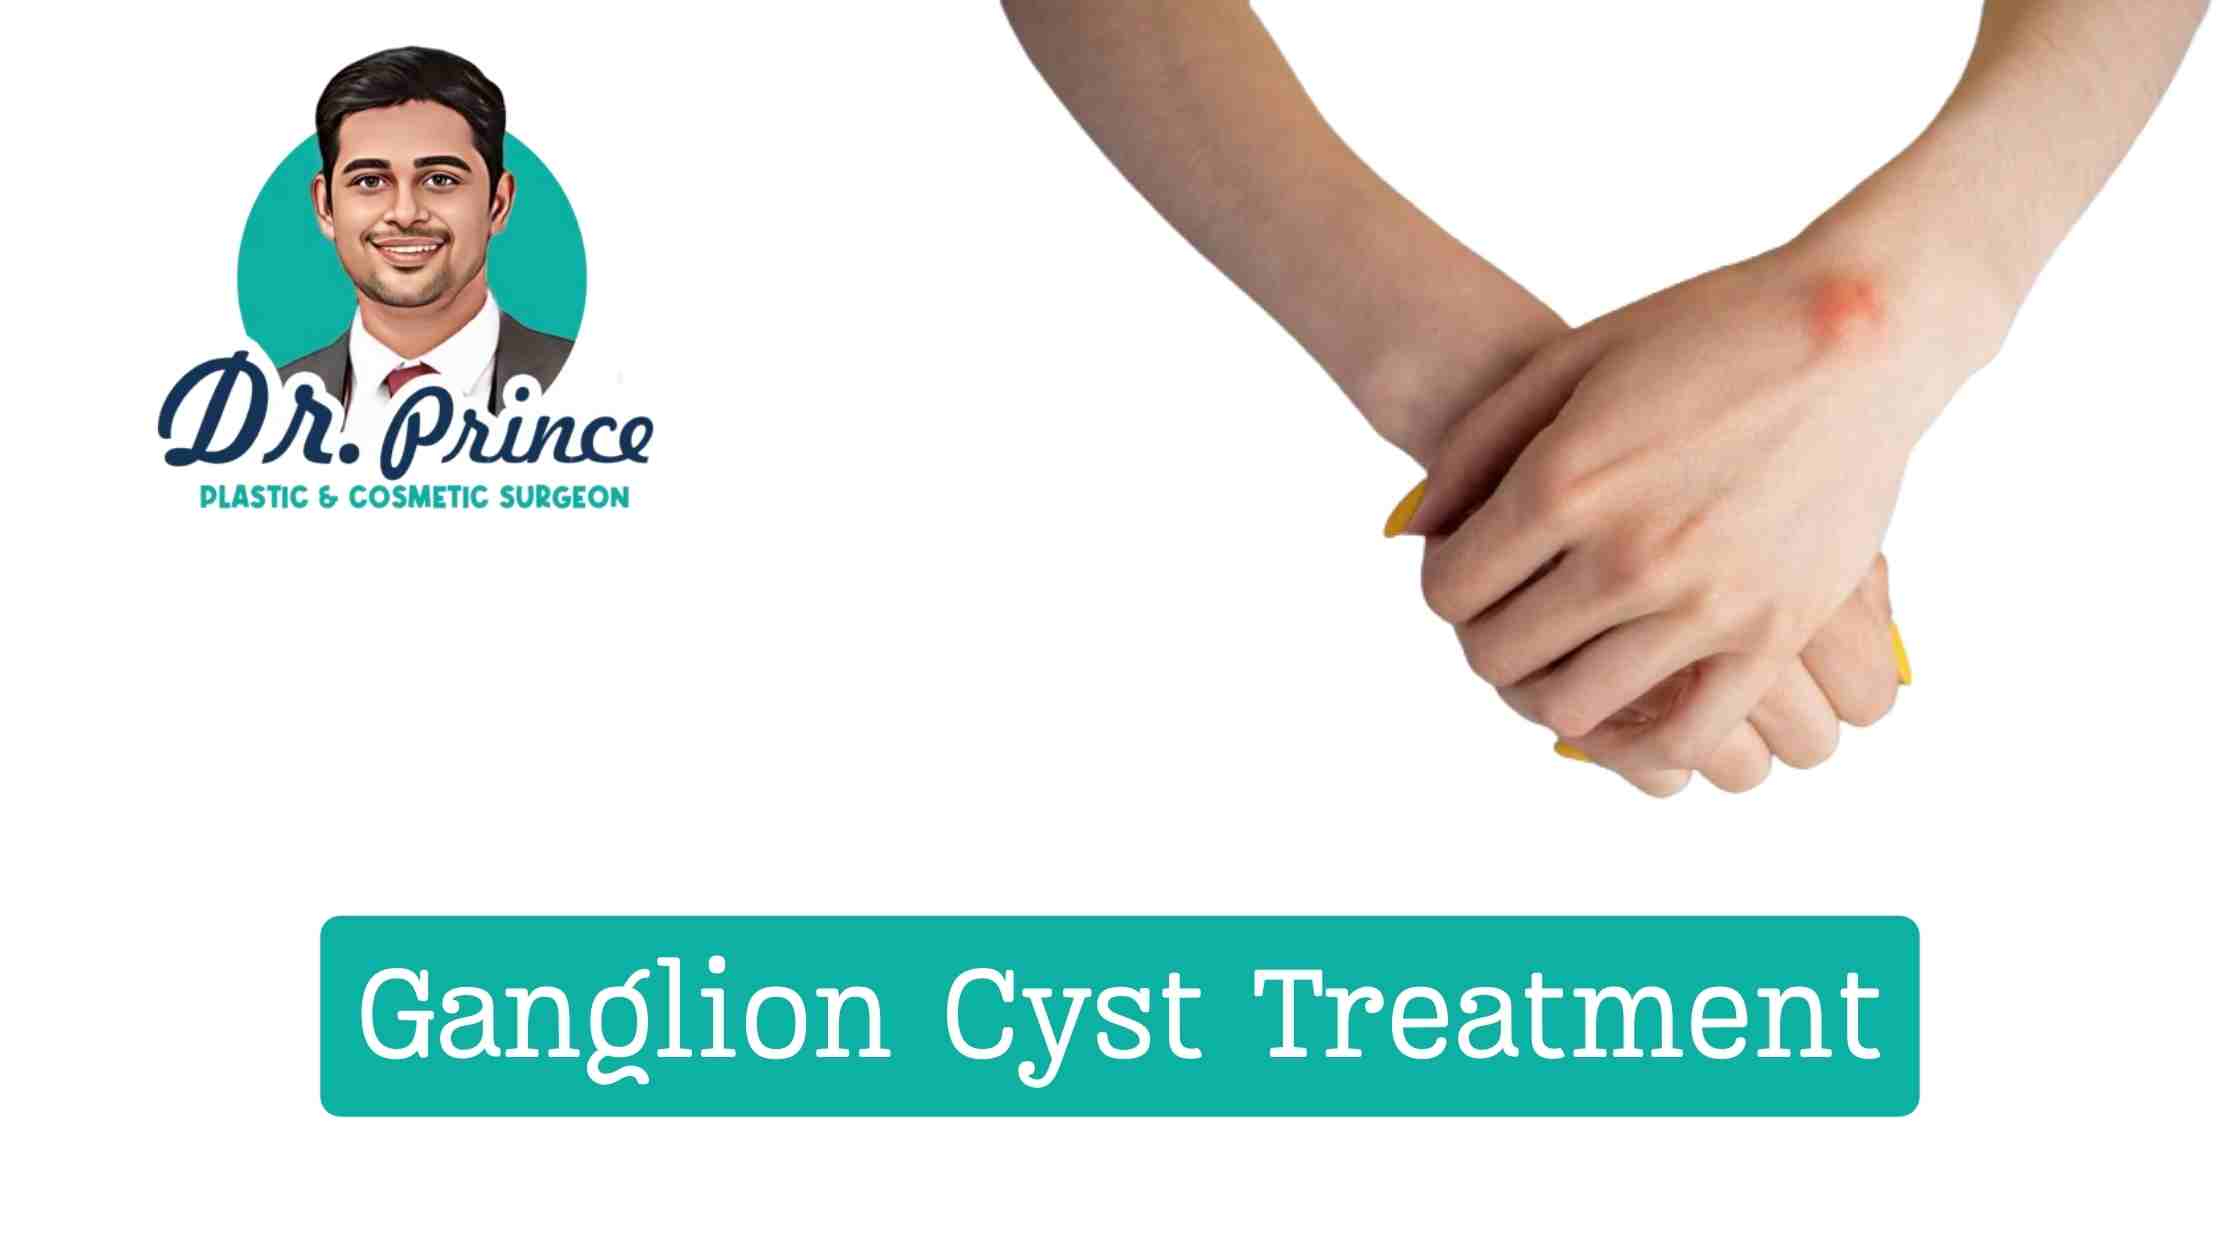 Ganglion Cyst Removal Surgery - Dr. Prince at Sushrutha Institute of Plastic Surgery, Thrissur.